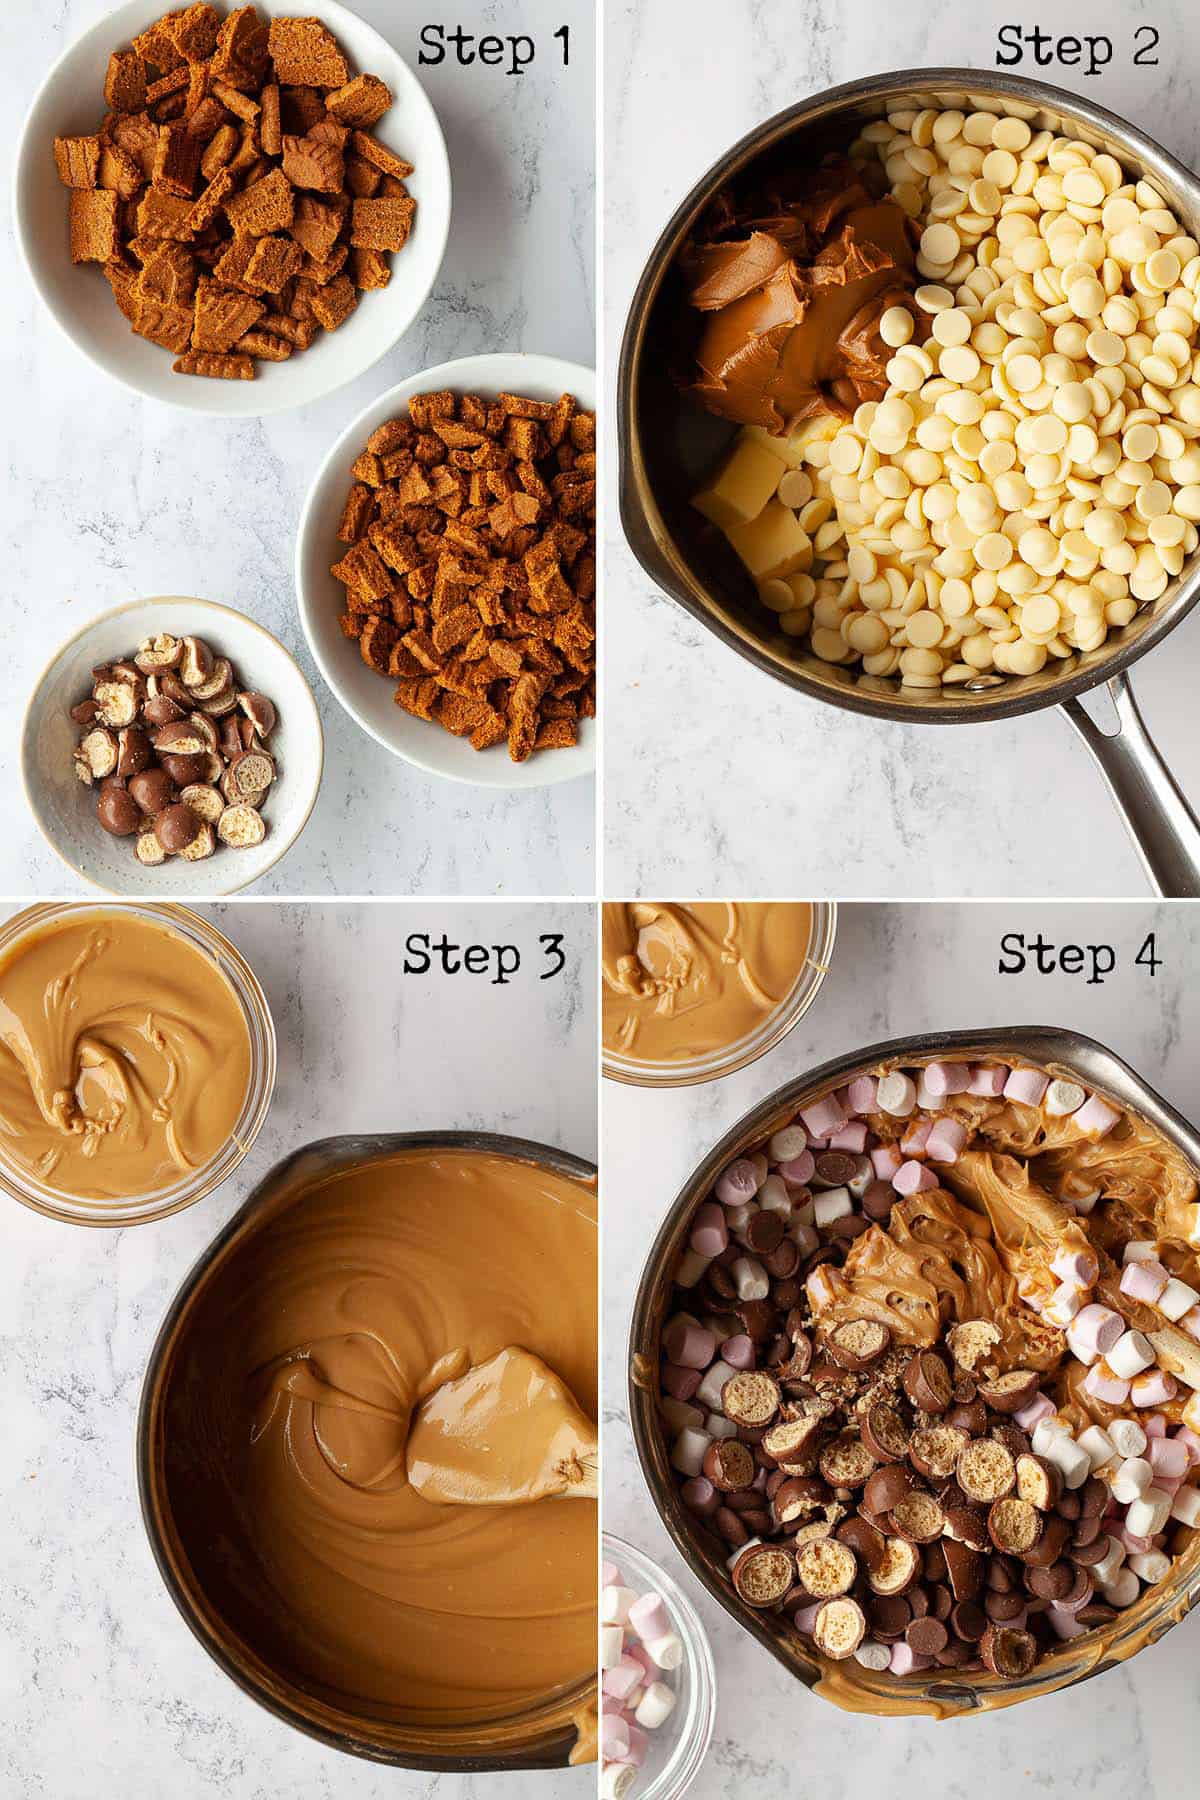 Collage of images showing a chocolate no bake dessert being made